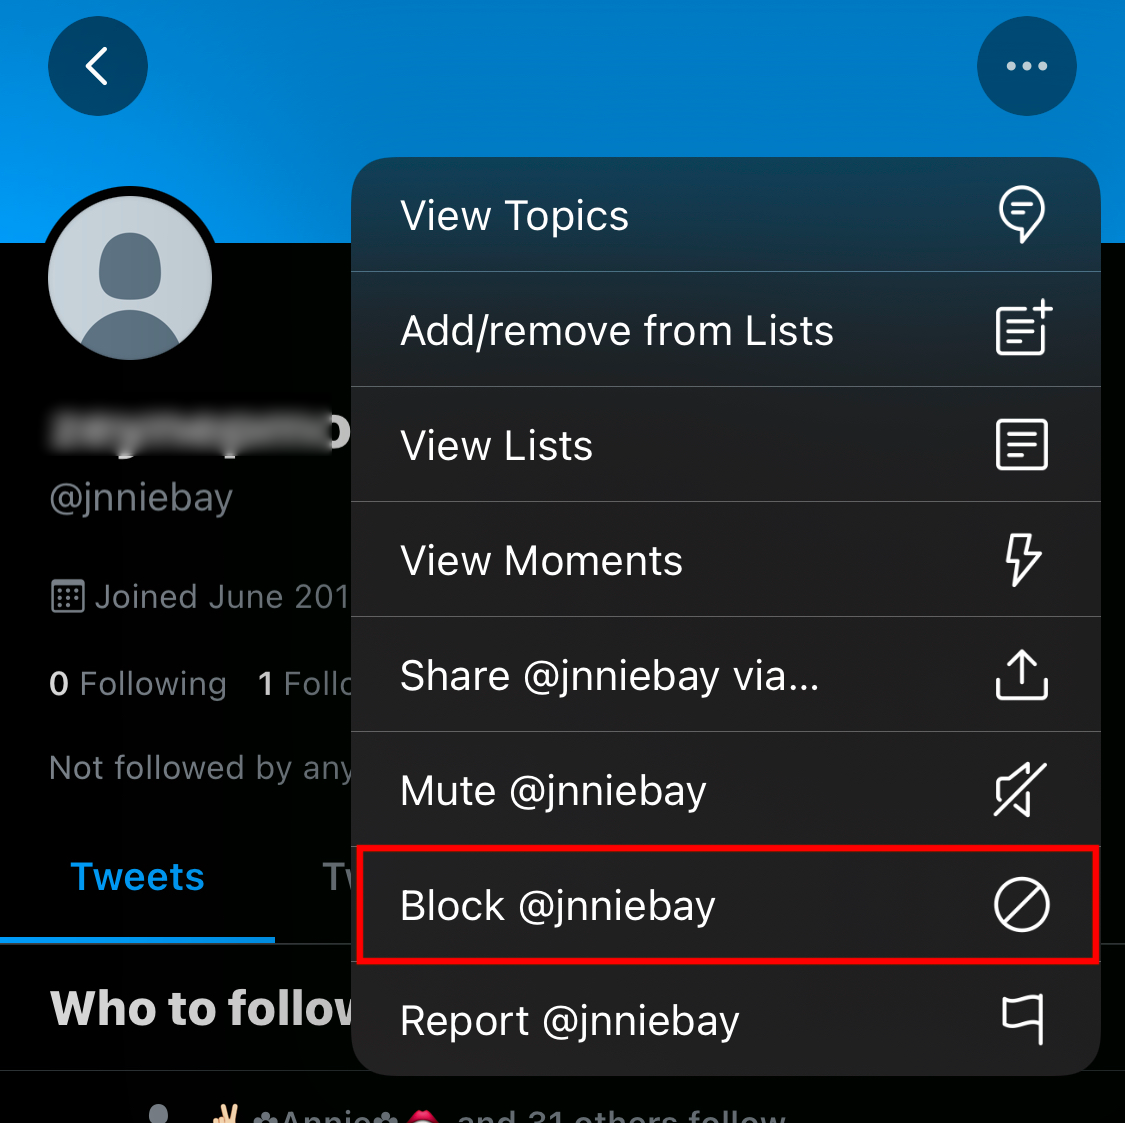 Find out who blocked you on Twitter